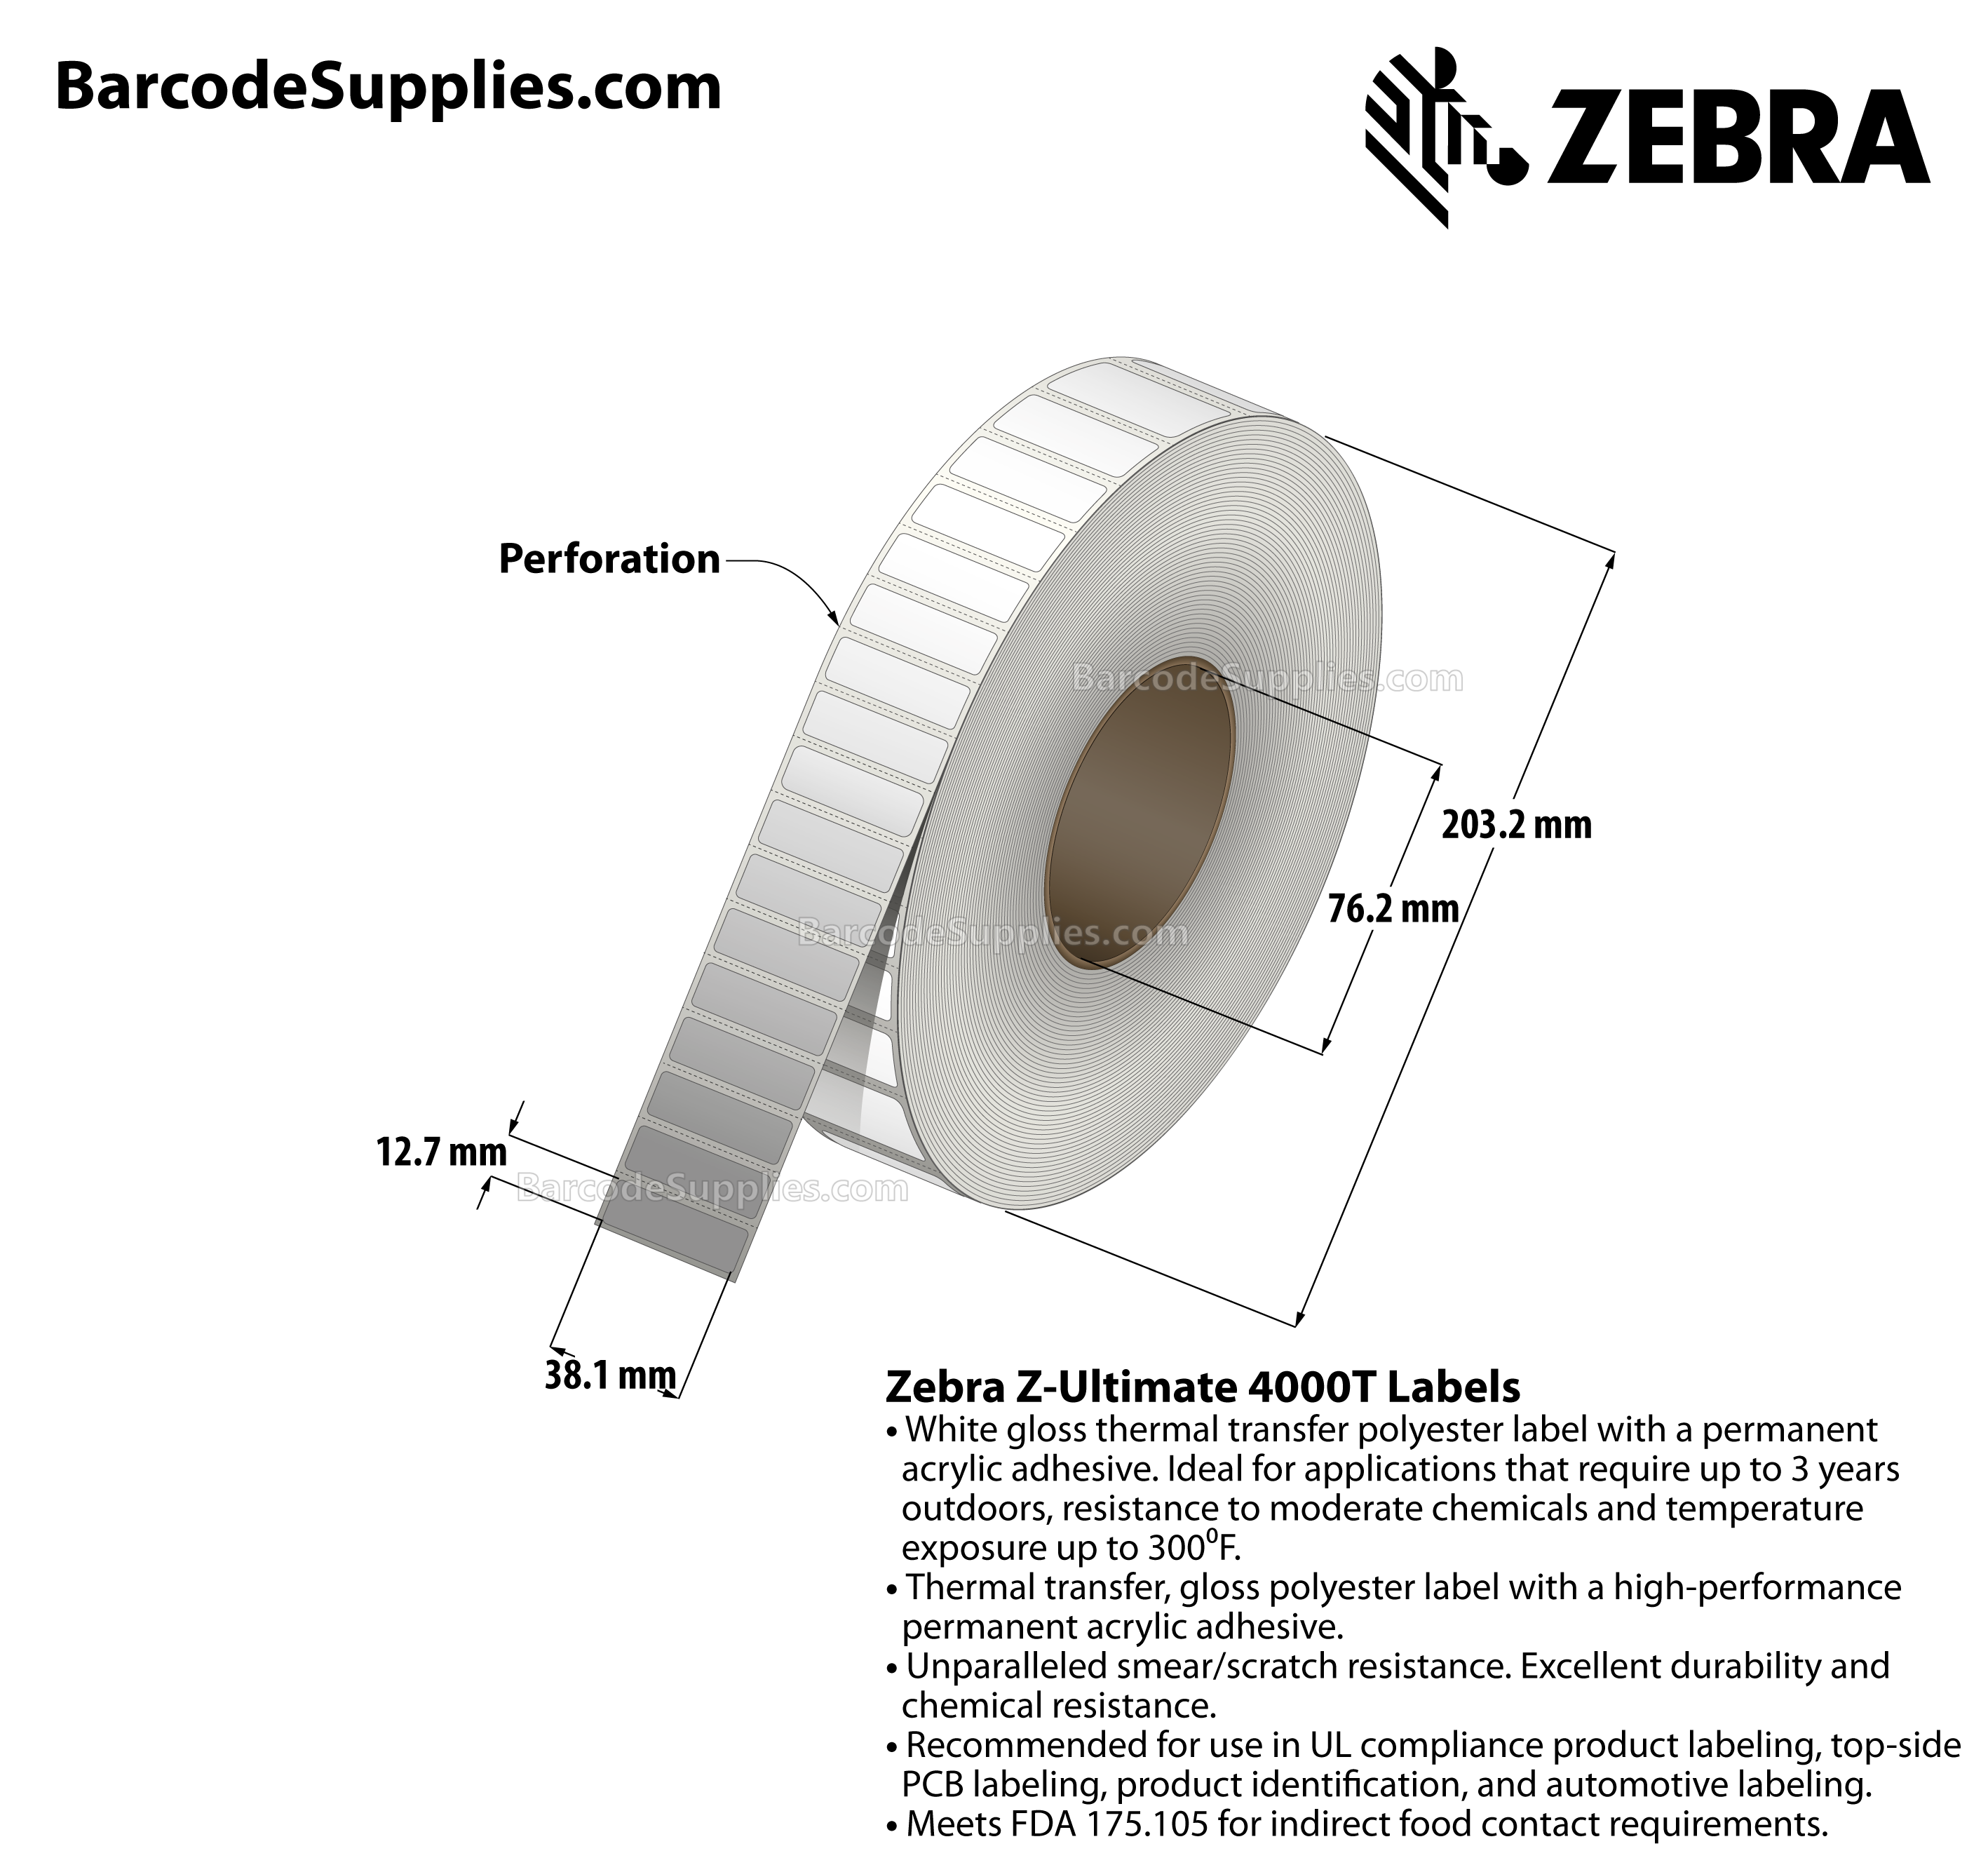 1.5 x 0.5 Thermal Transfer White Z-Ultimate 4000T Labels With Permanent Adhesive - Perforated - 9420 Labels Per Roll - Carton Of 4 Rolls - 37680 Labels Total - MPN: 10011706